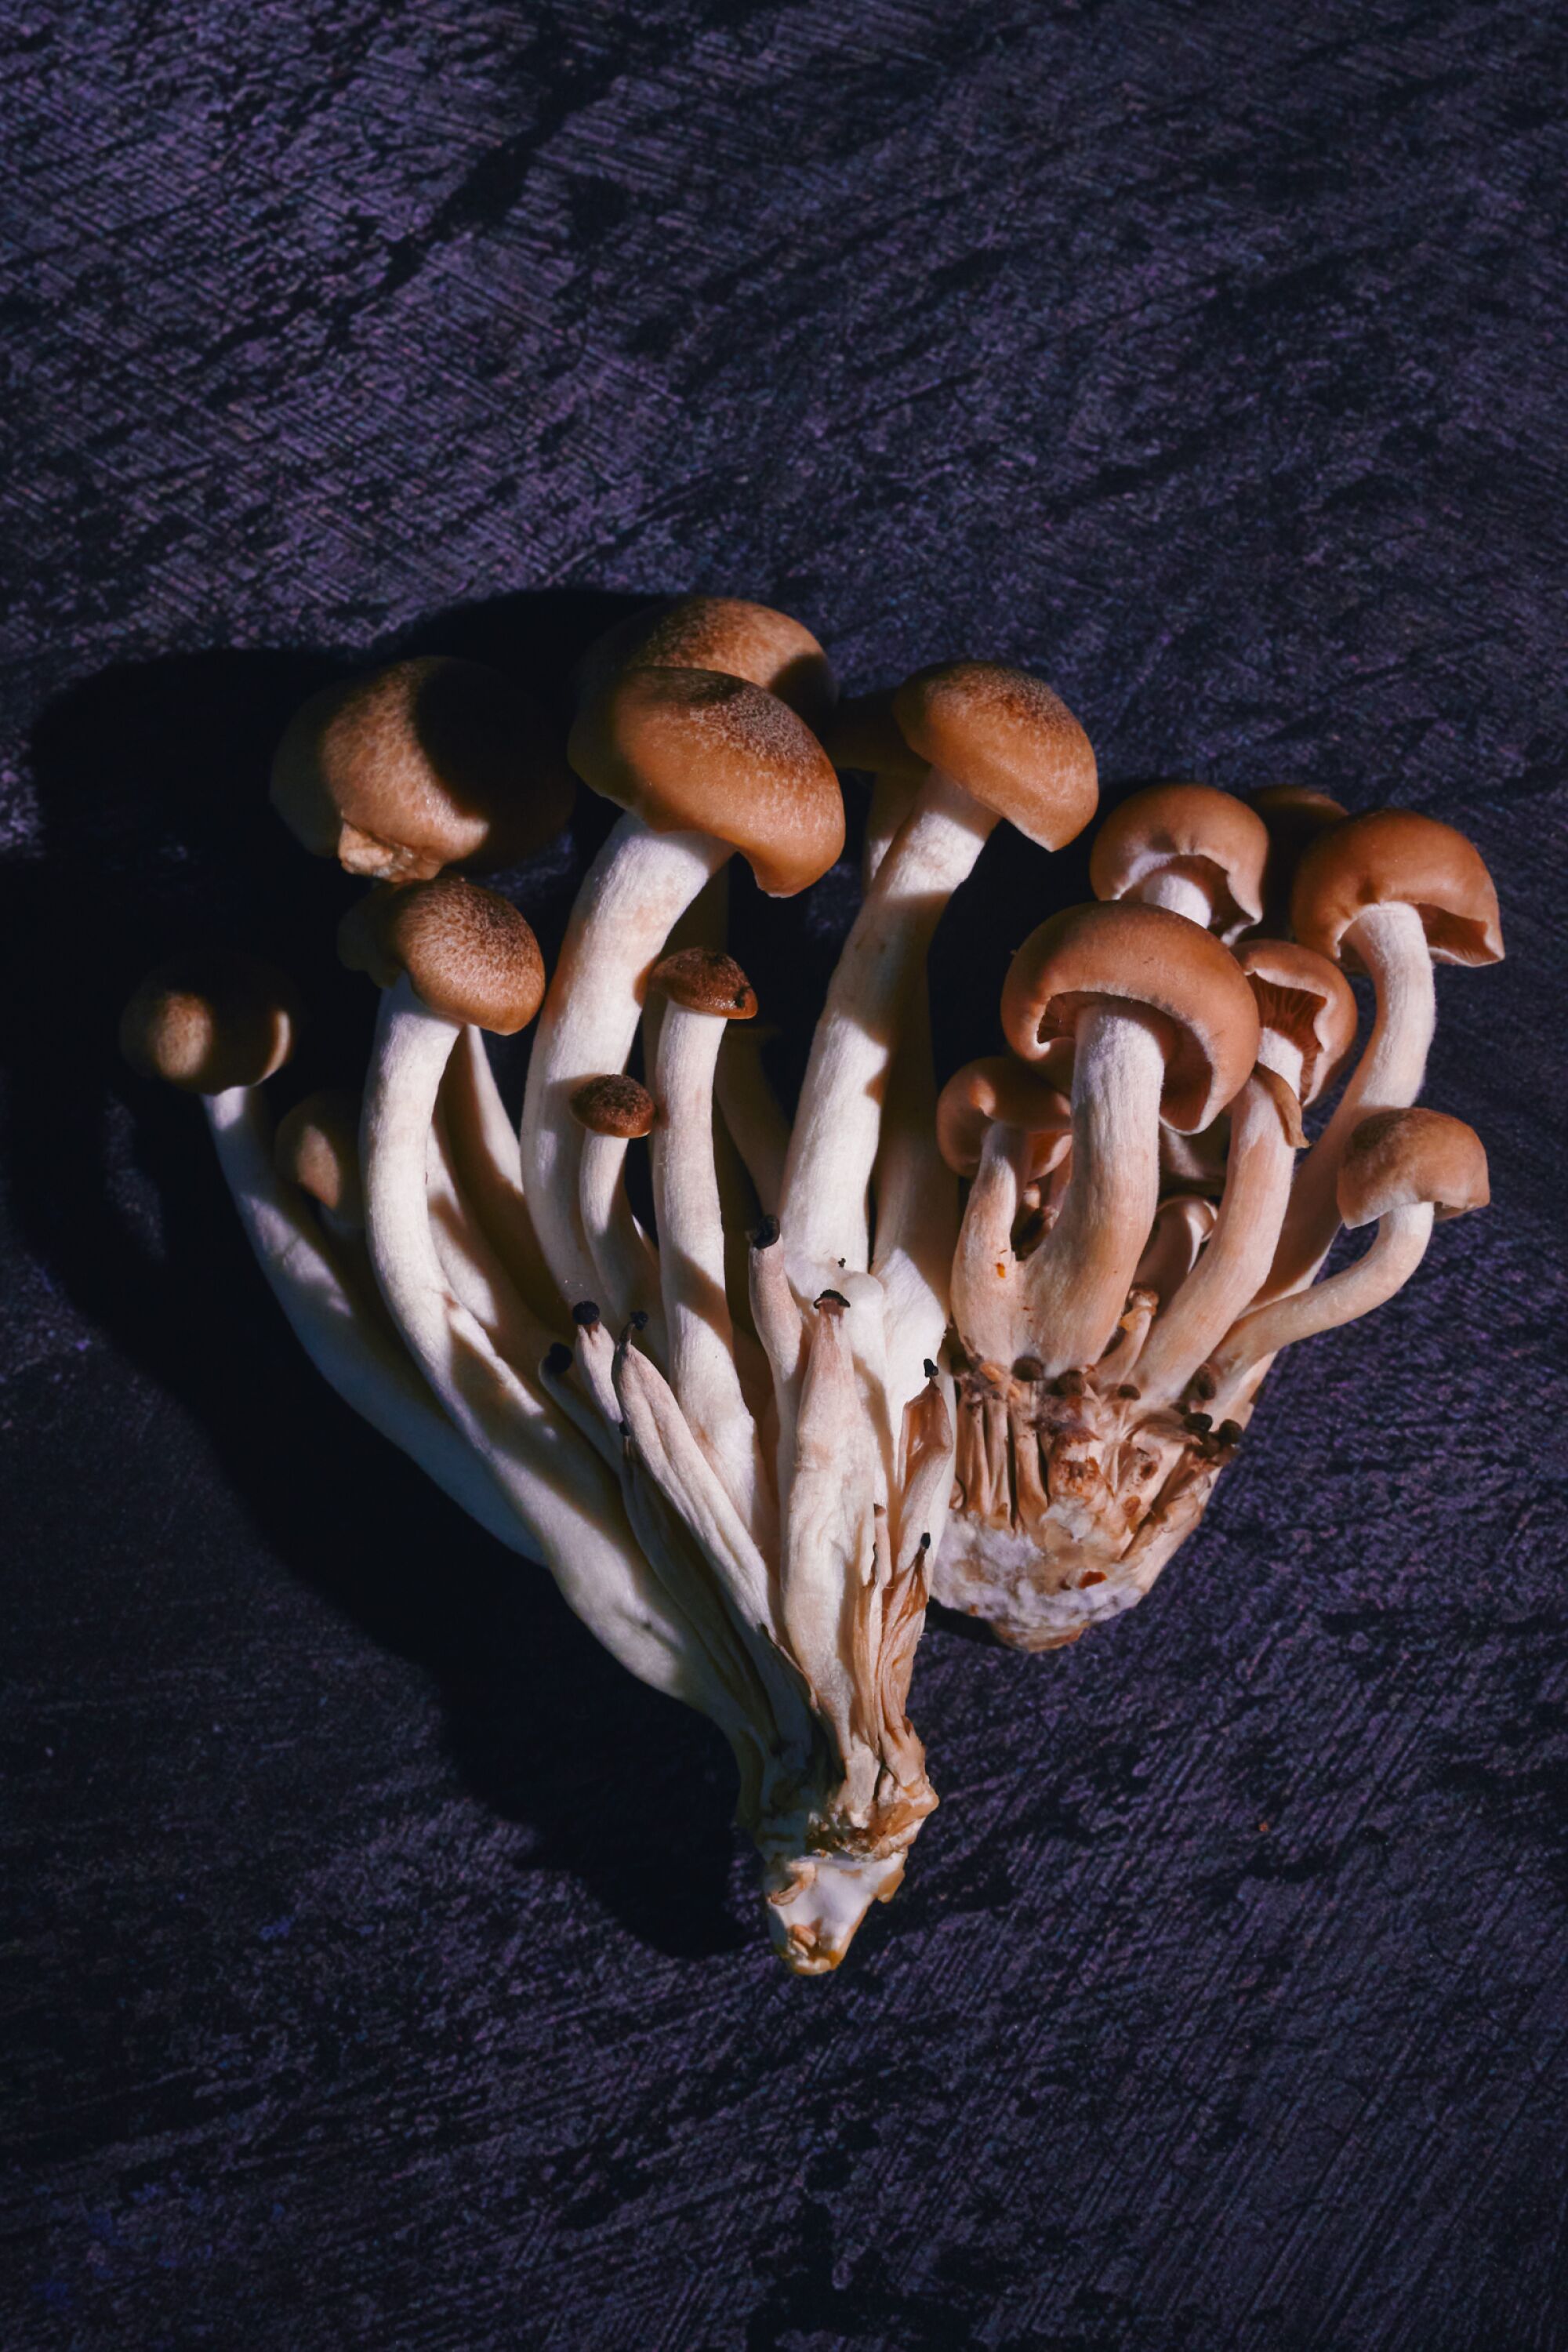 A cluster of mushrooms on a textured tabletop.